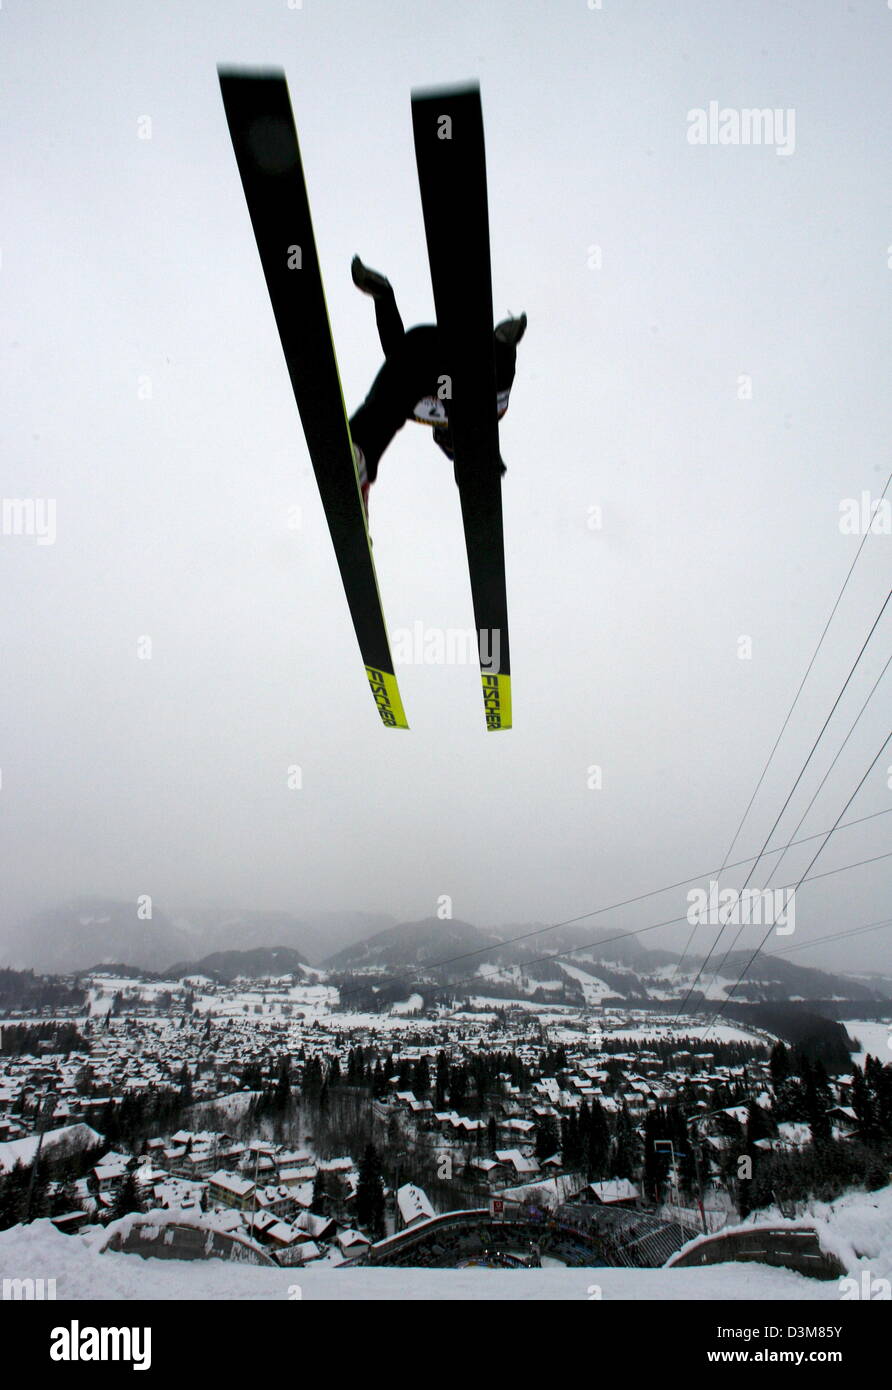 (dpa) - The picture shows a ski jumper airborne in action during the preliminaries of the 54th Four Hill Tournament on the Schattenberg ski jump in Oberstdorf, Germany, Wednesday, 28 December 2005. Photo Peter Kneffel Stock Photo